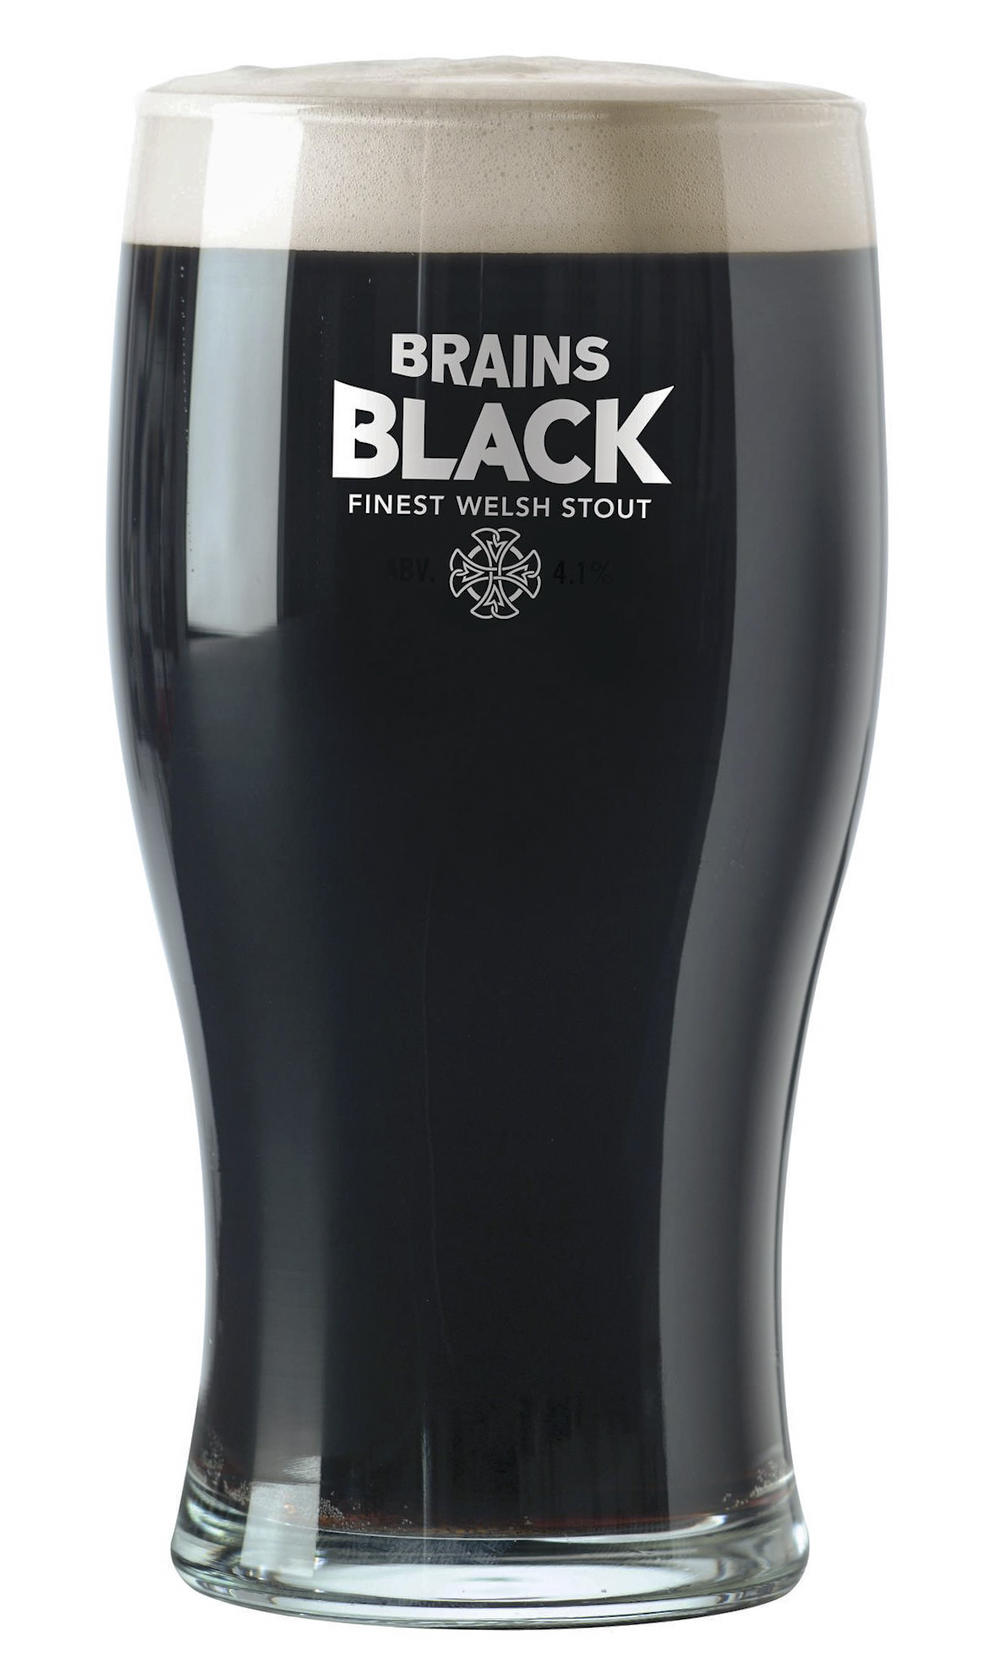 Brains Black enters a market dominated by Guinness.